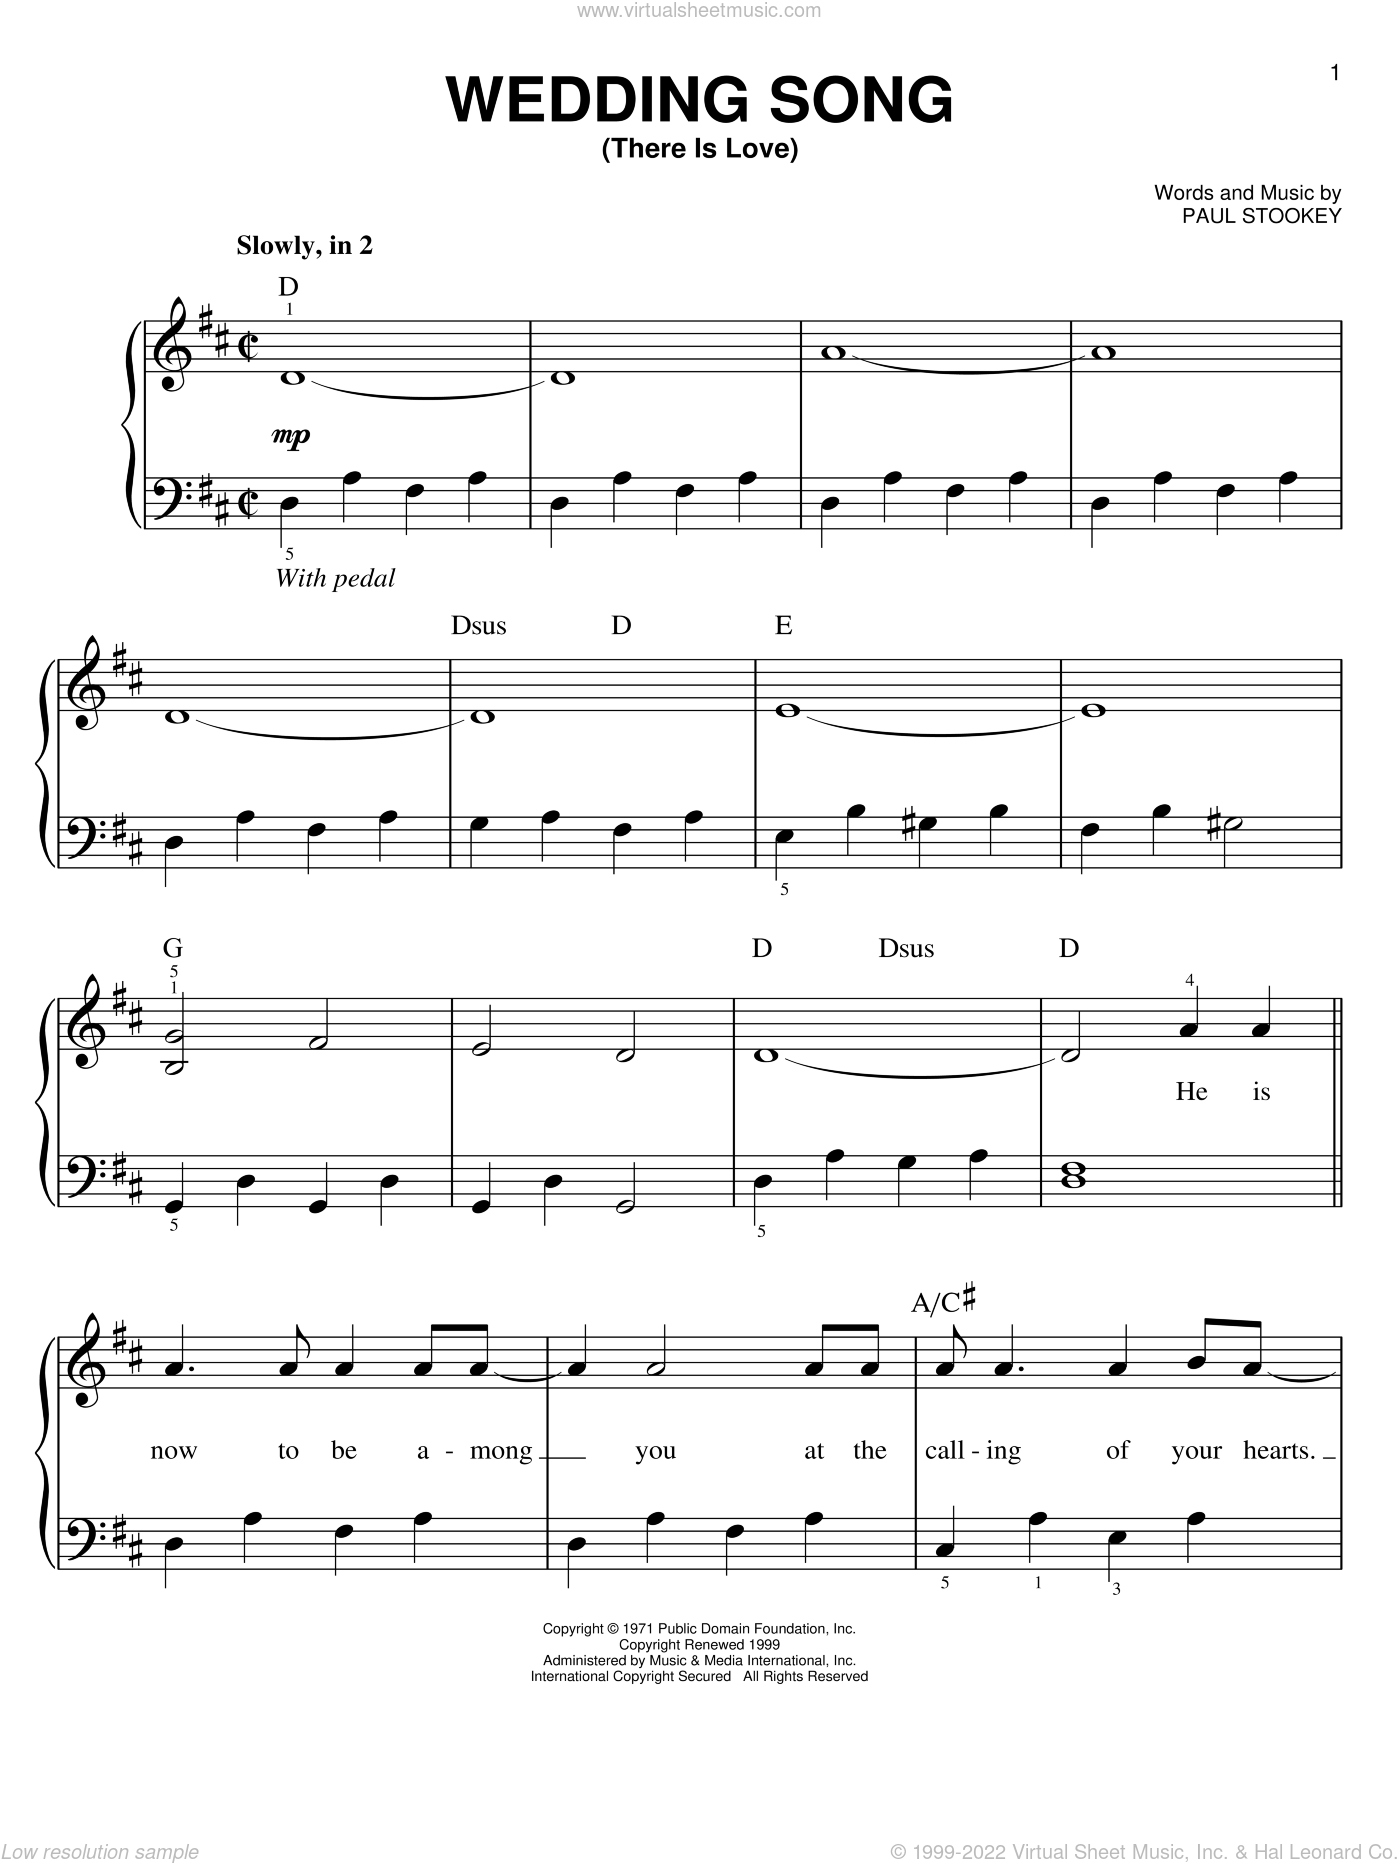 Mary Wedding Song (There Is Love), (easy) sheet music